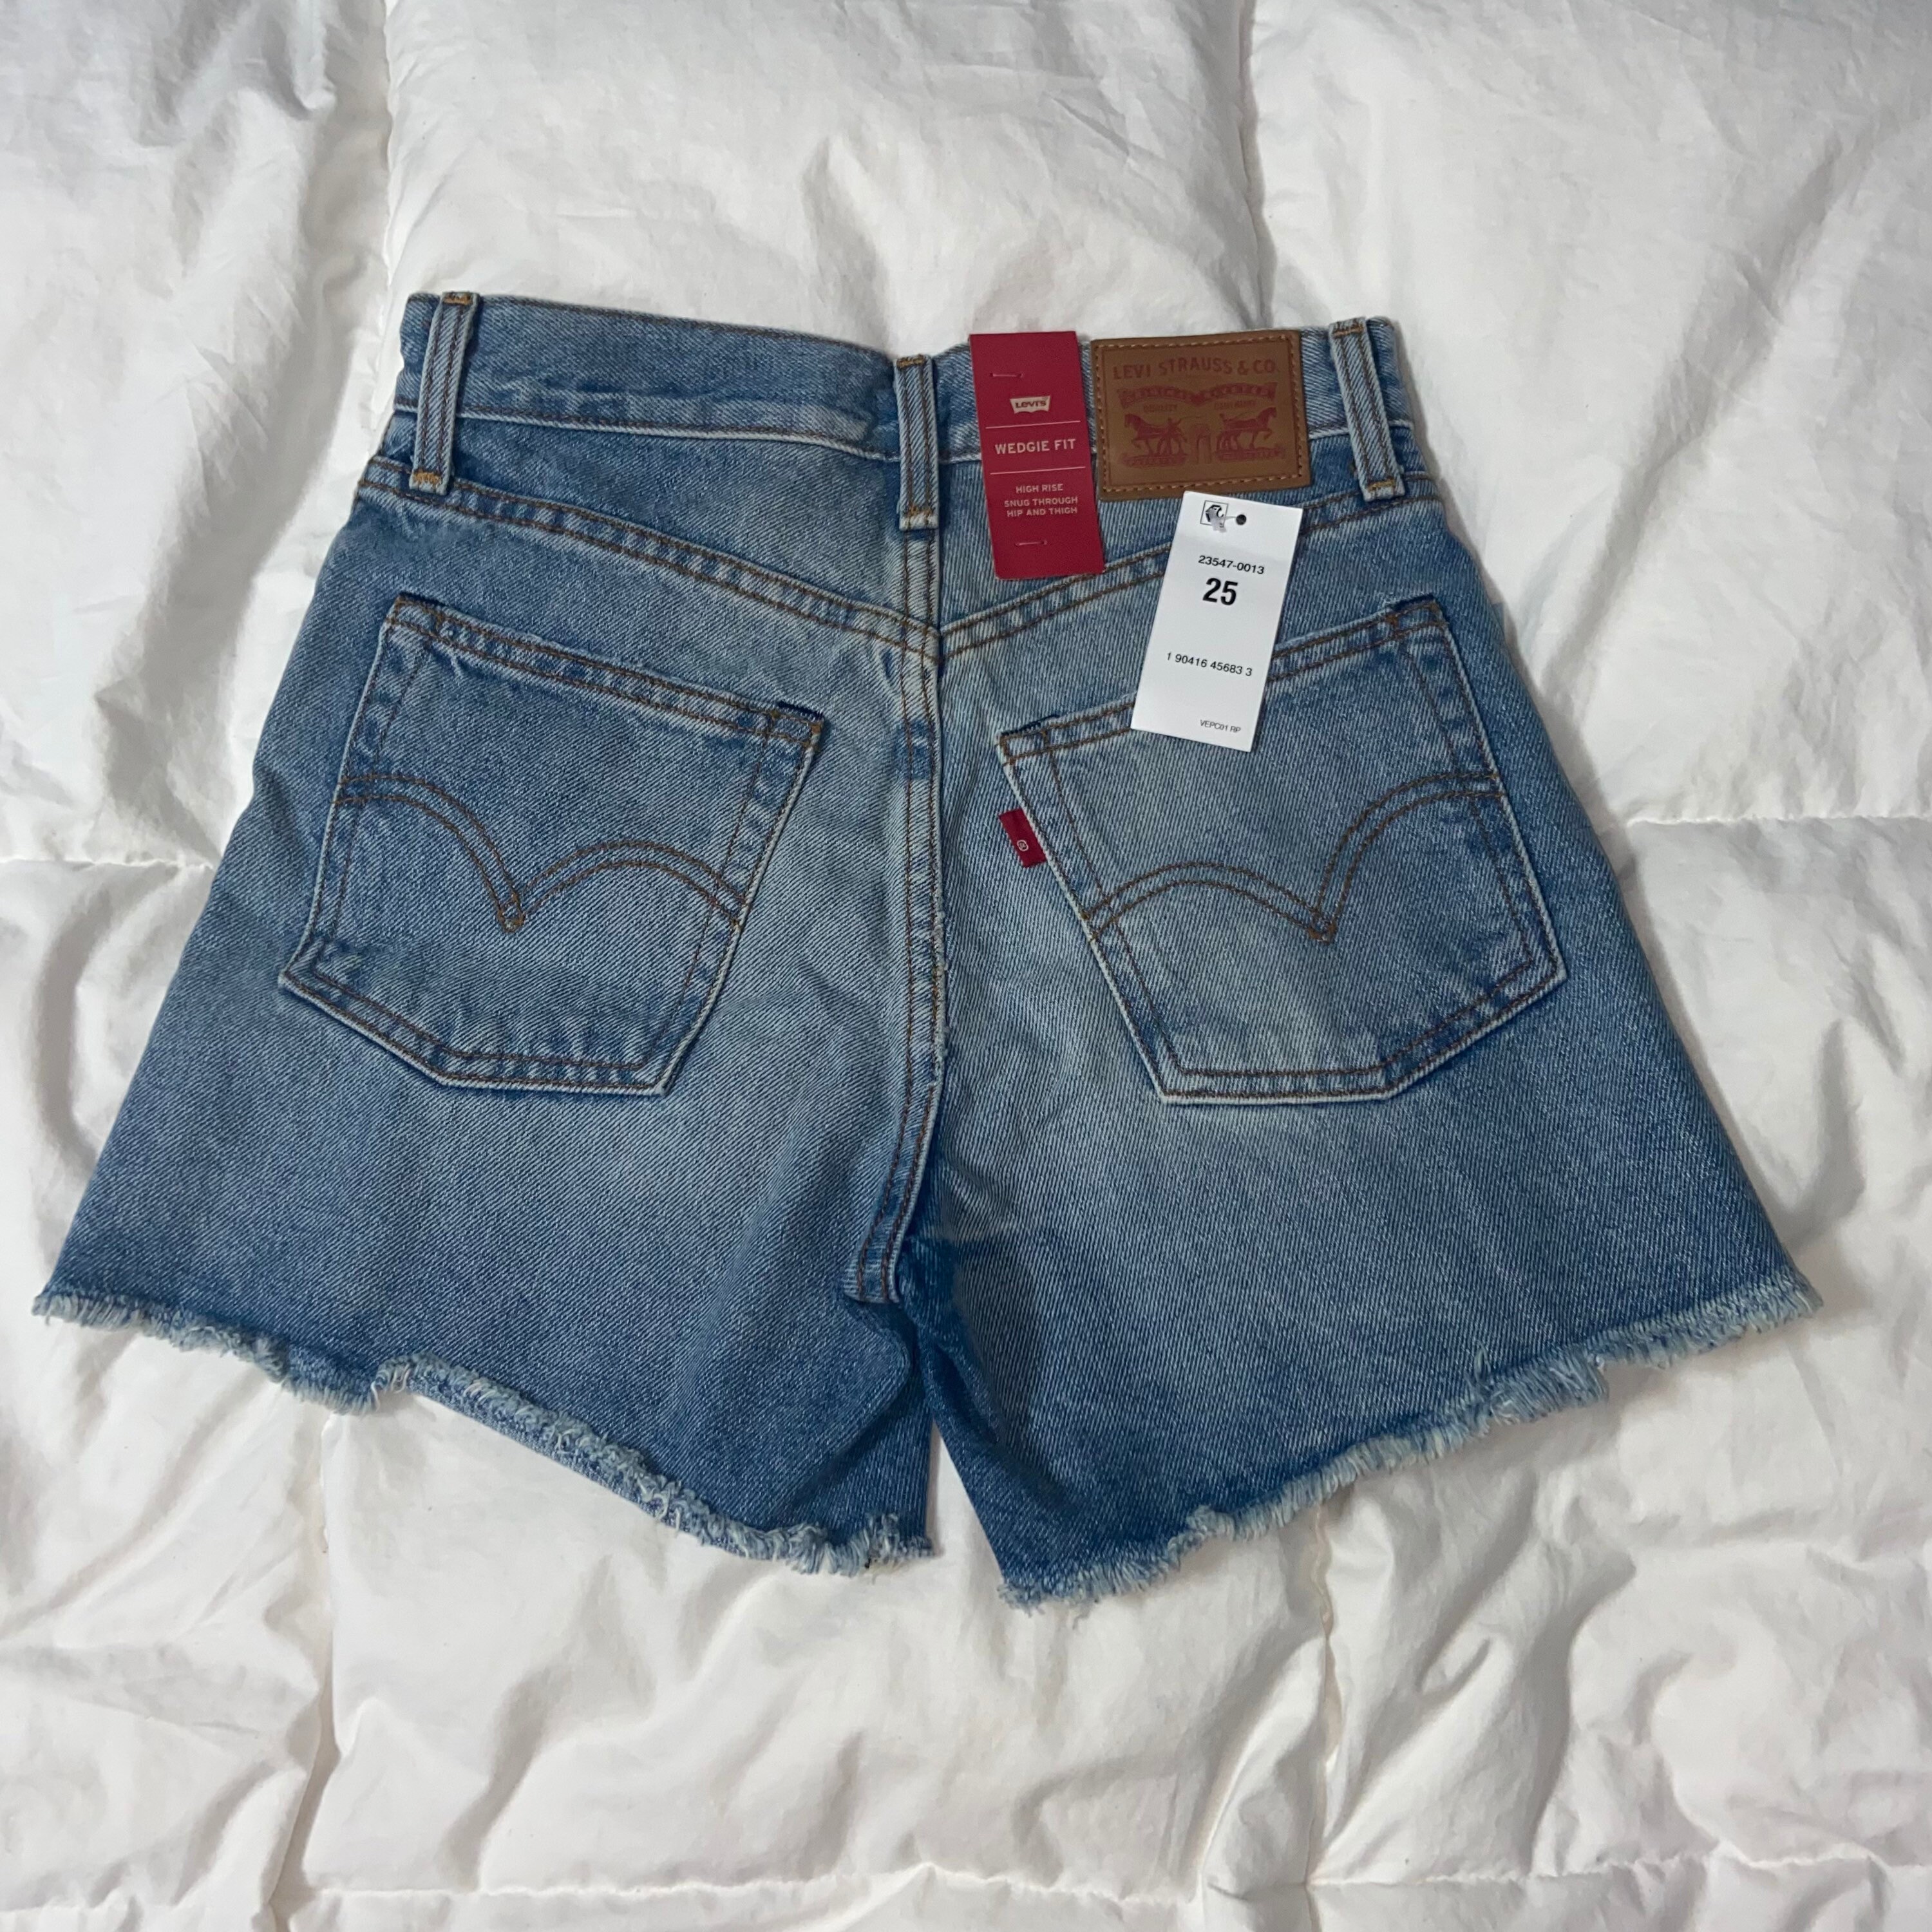 NWT Levis Wedgie Fit High Waisted Jean Shorts Size 25 - Etsy Australia